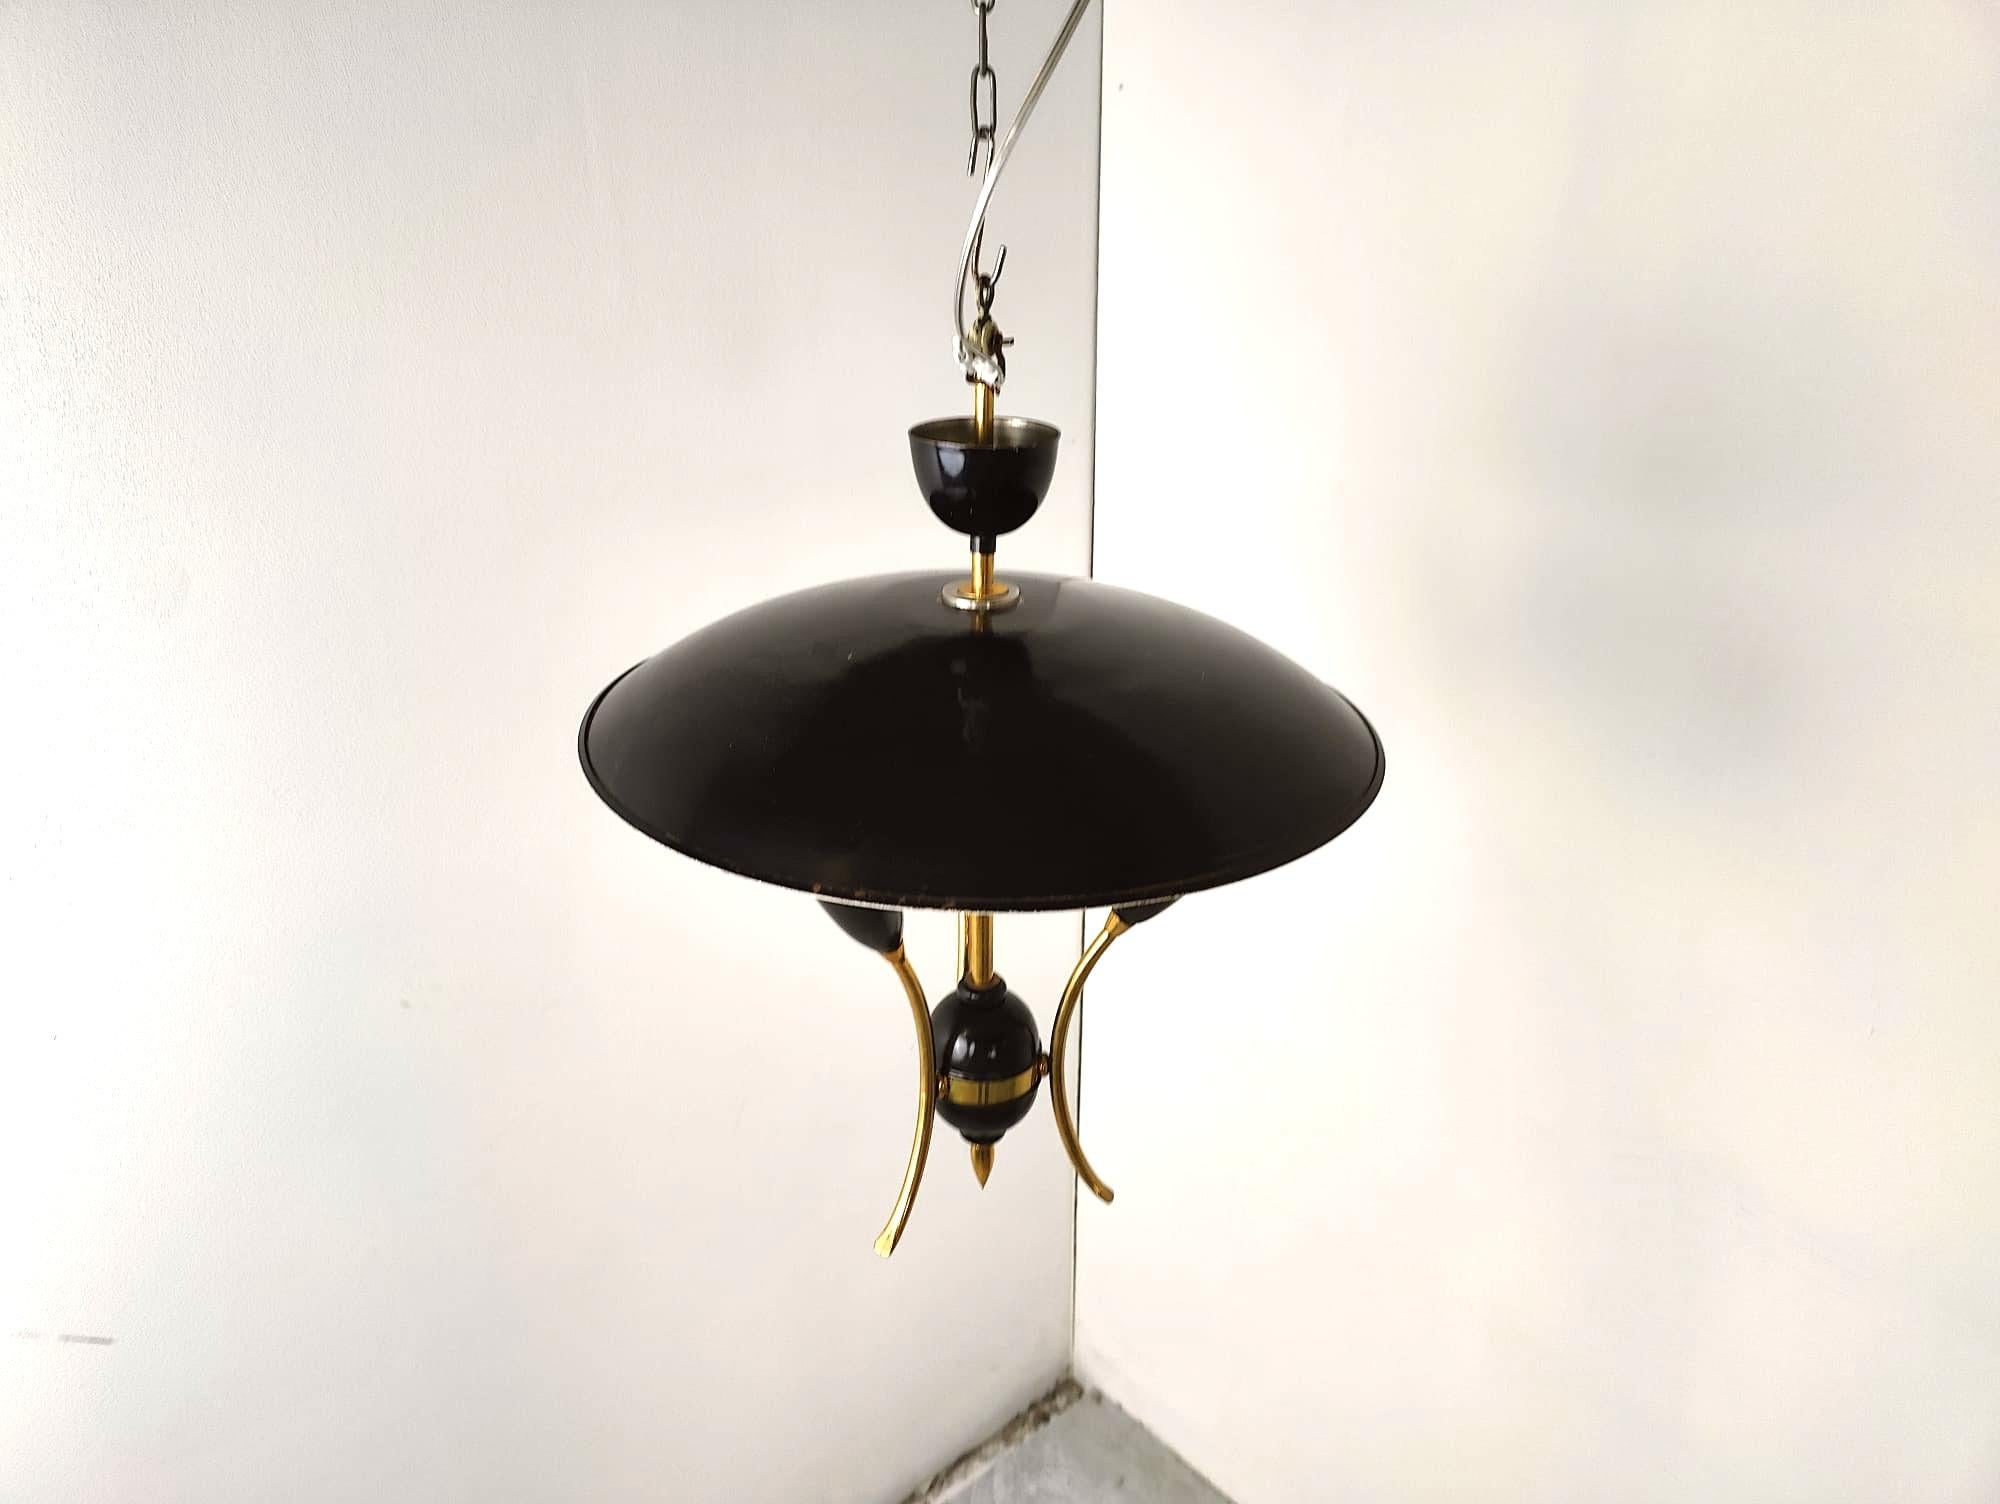 Mid century ceiling light in the manner of stilnovo, Italy.

Black metal shade, with brass arms and 3 lihgt points.

Good condition, tested and ready to use.

It has new wiring.

1950s - Italy

Dimensions:
Height: 48cm
Diameter: 45cm

Ref: VIN0006